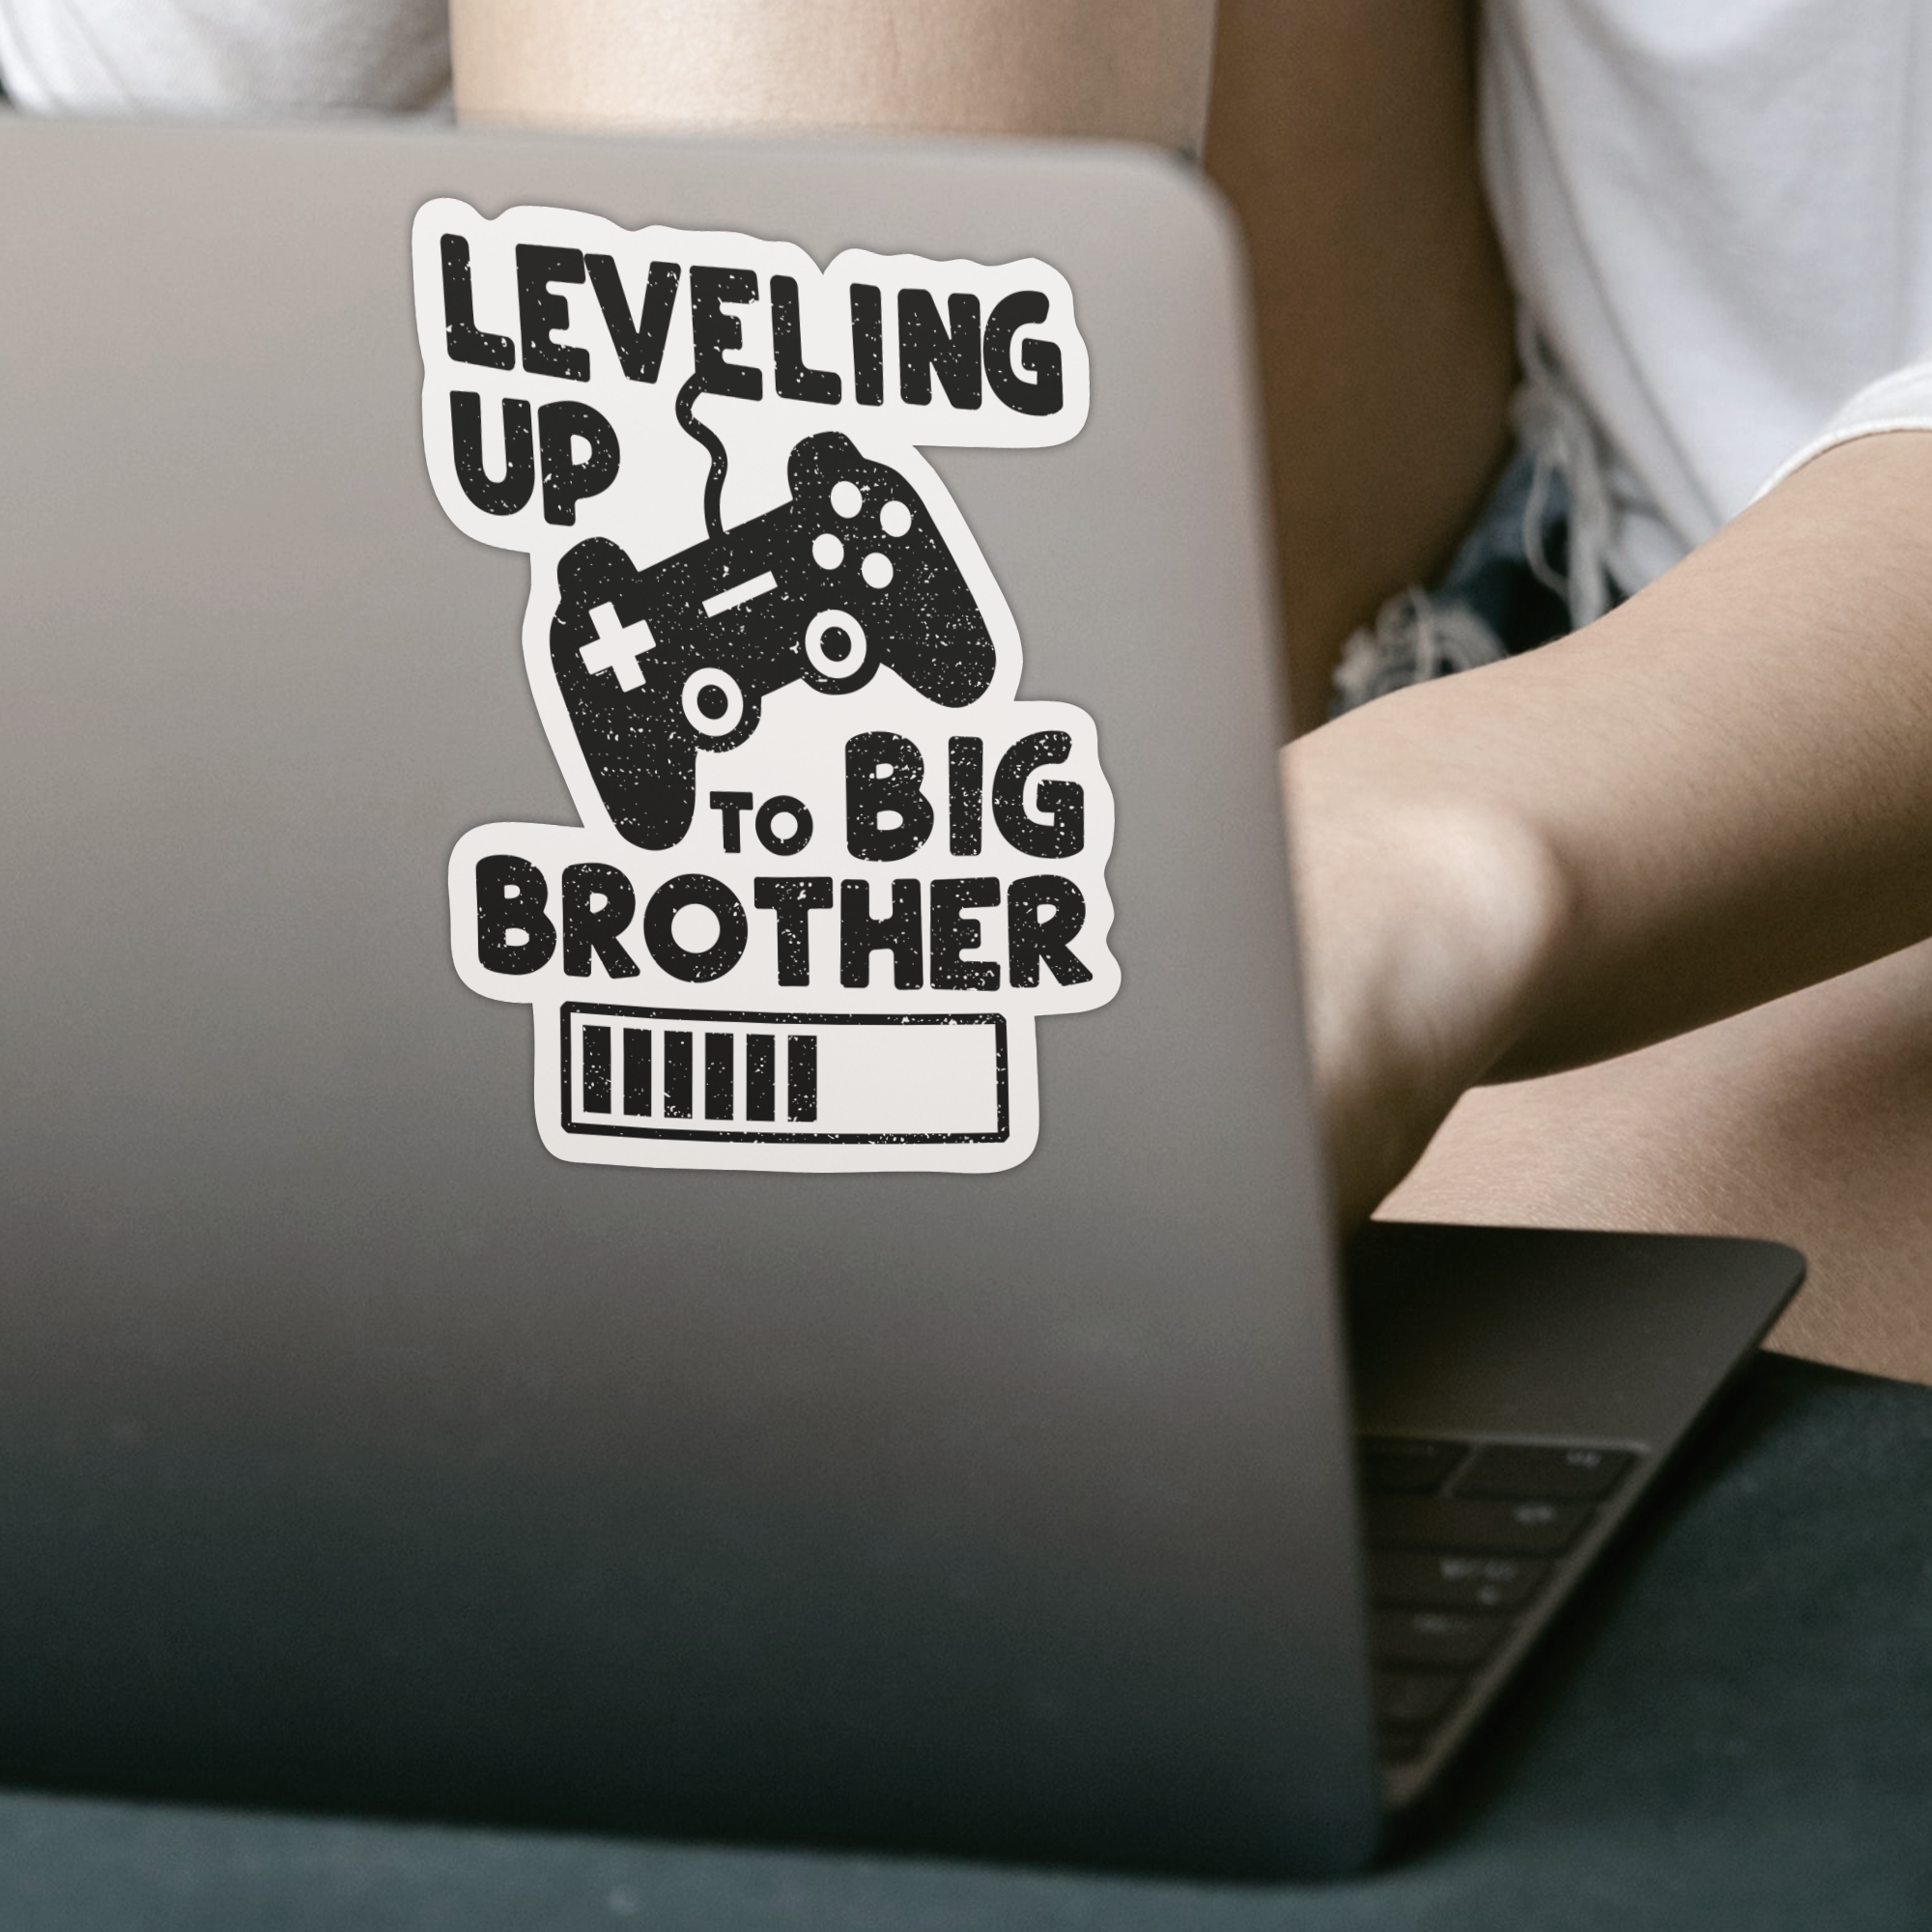 Leveling Up To Big Brother Sticker - DESIGNSBYJNK5.COM